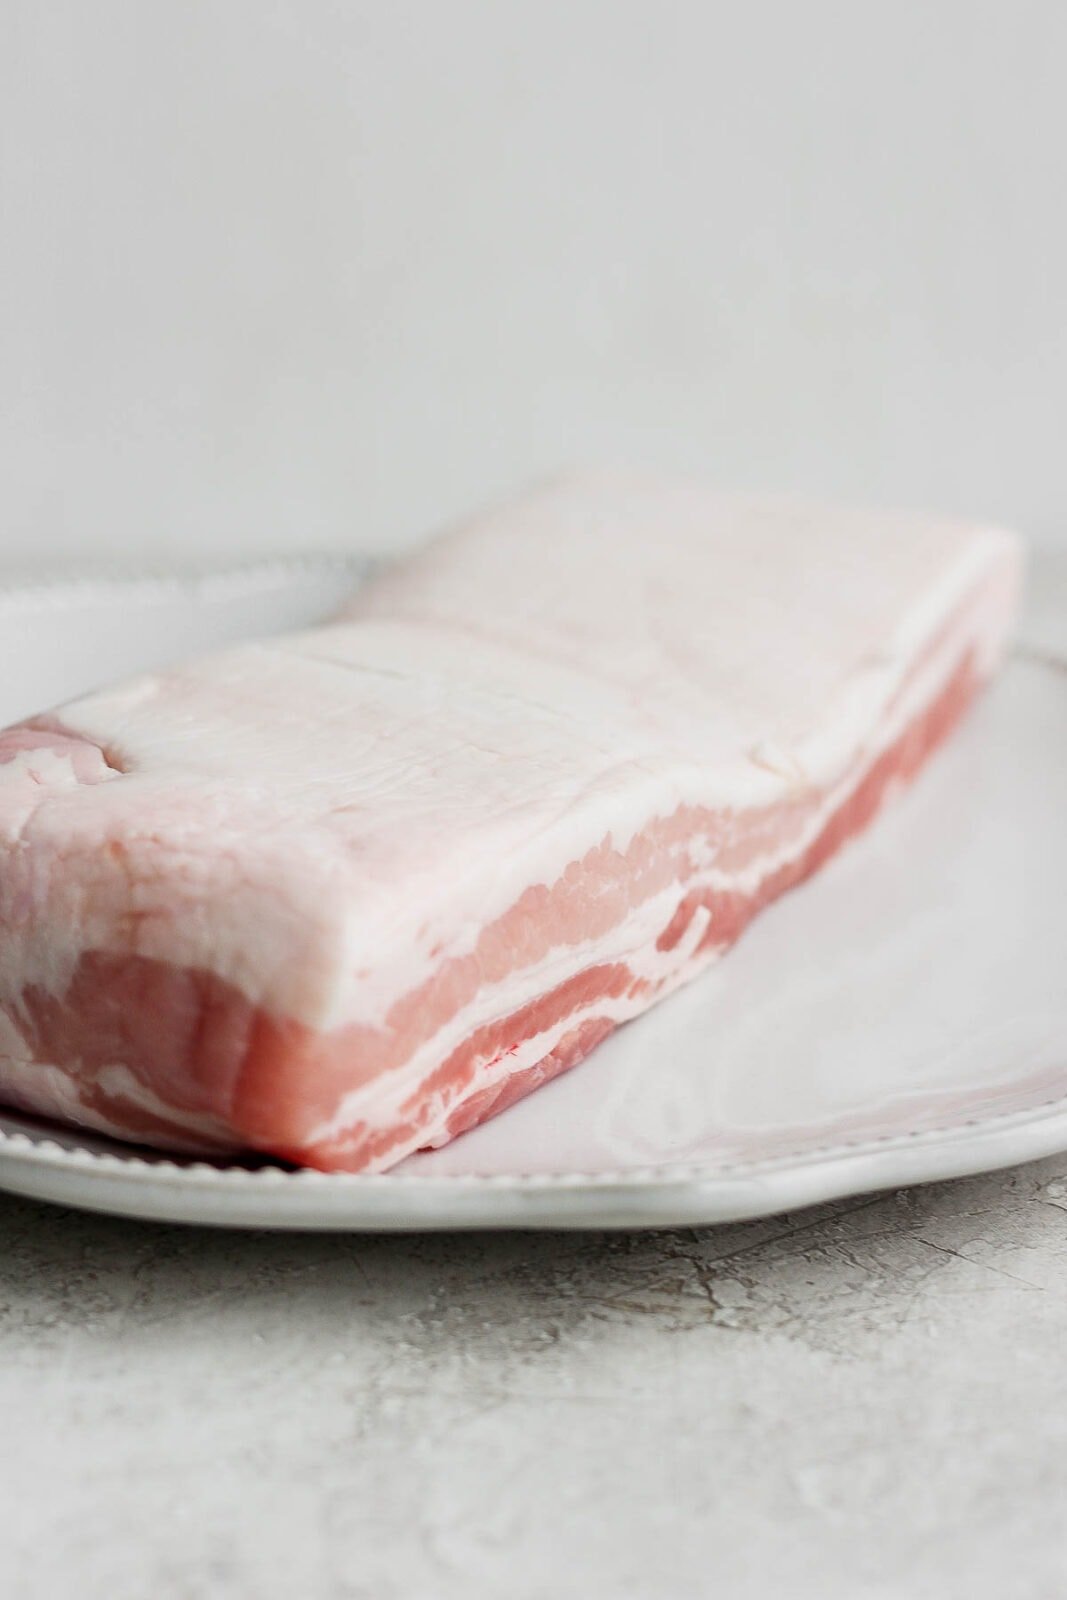 A piece of raw pork belly sitting on a plate. 